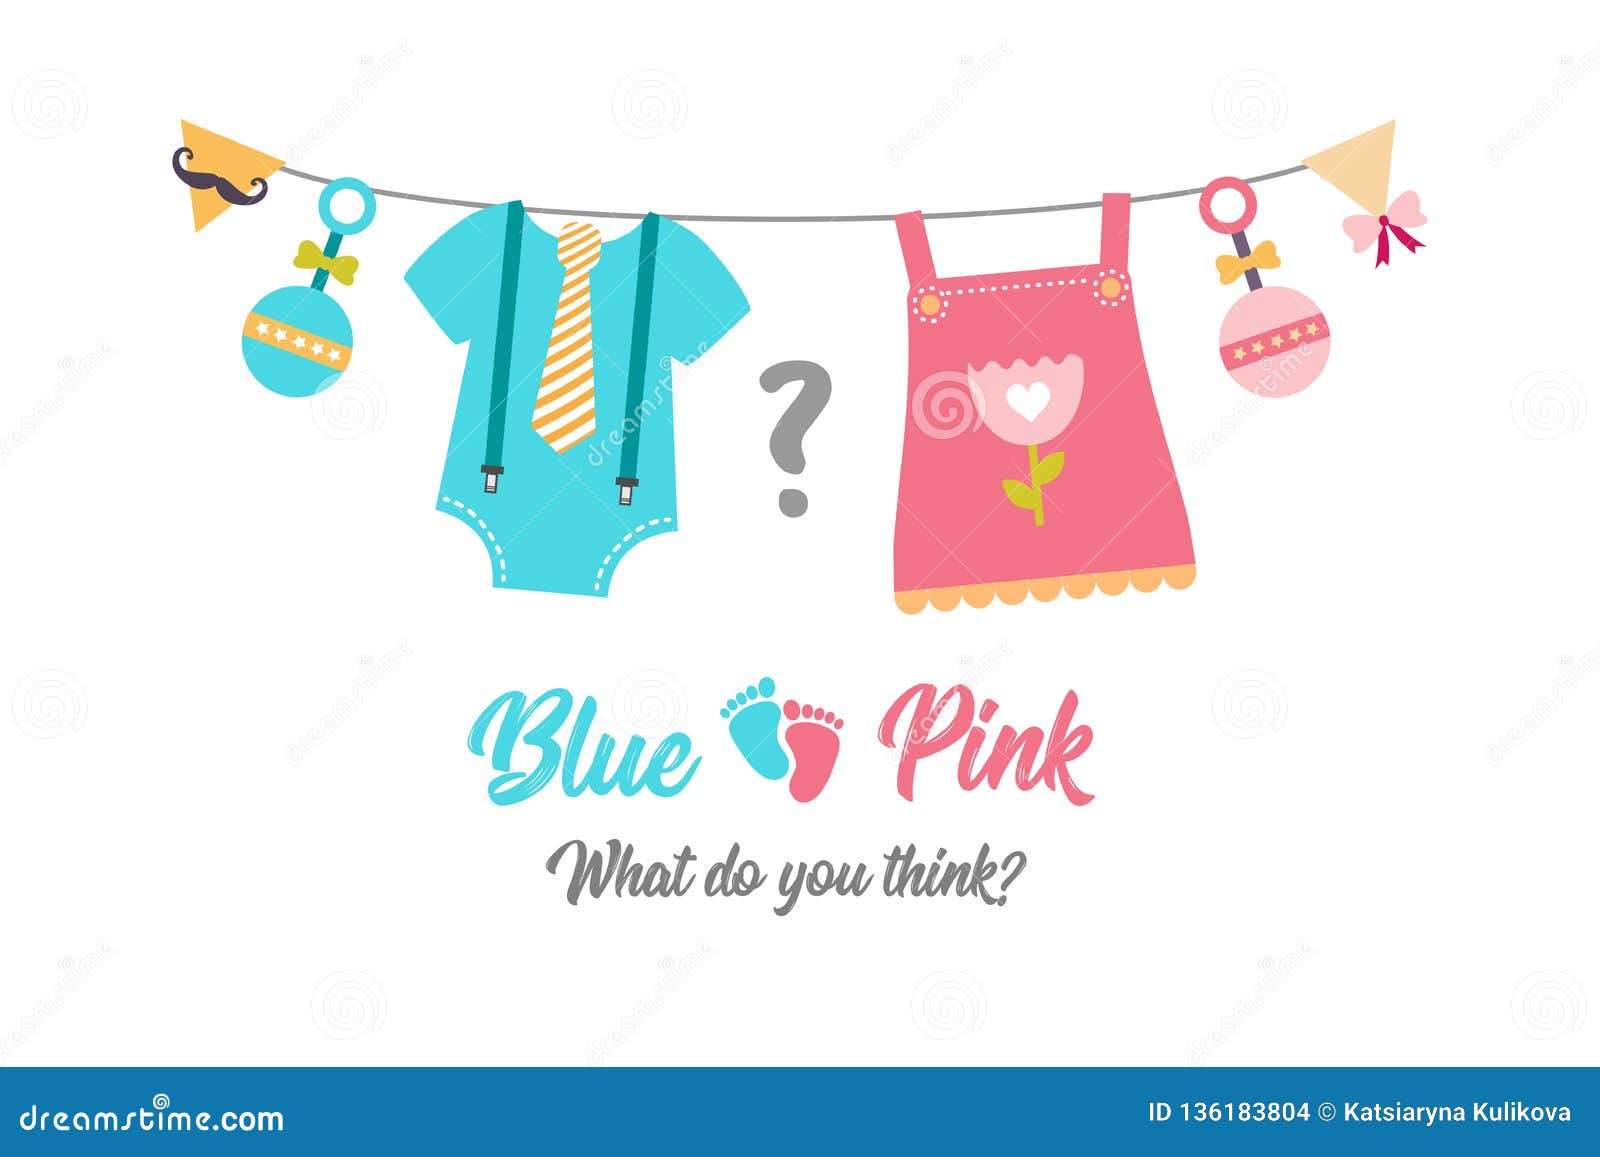 Gender Reveal Party Invitations Free Template from thumbs.dreamstime.com